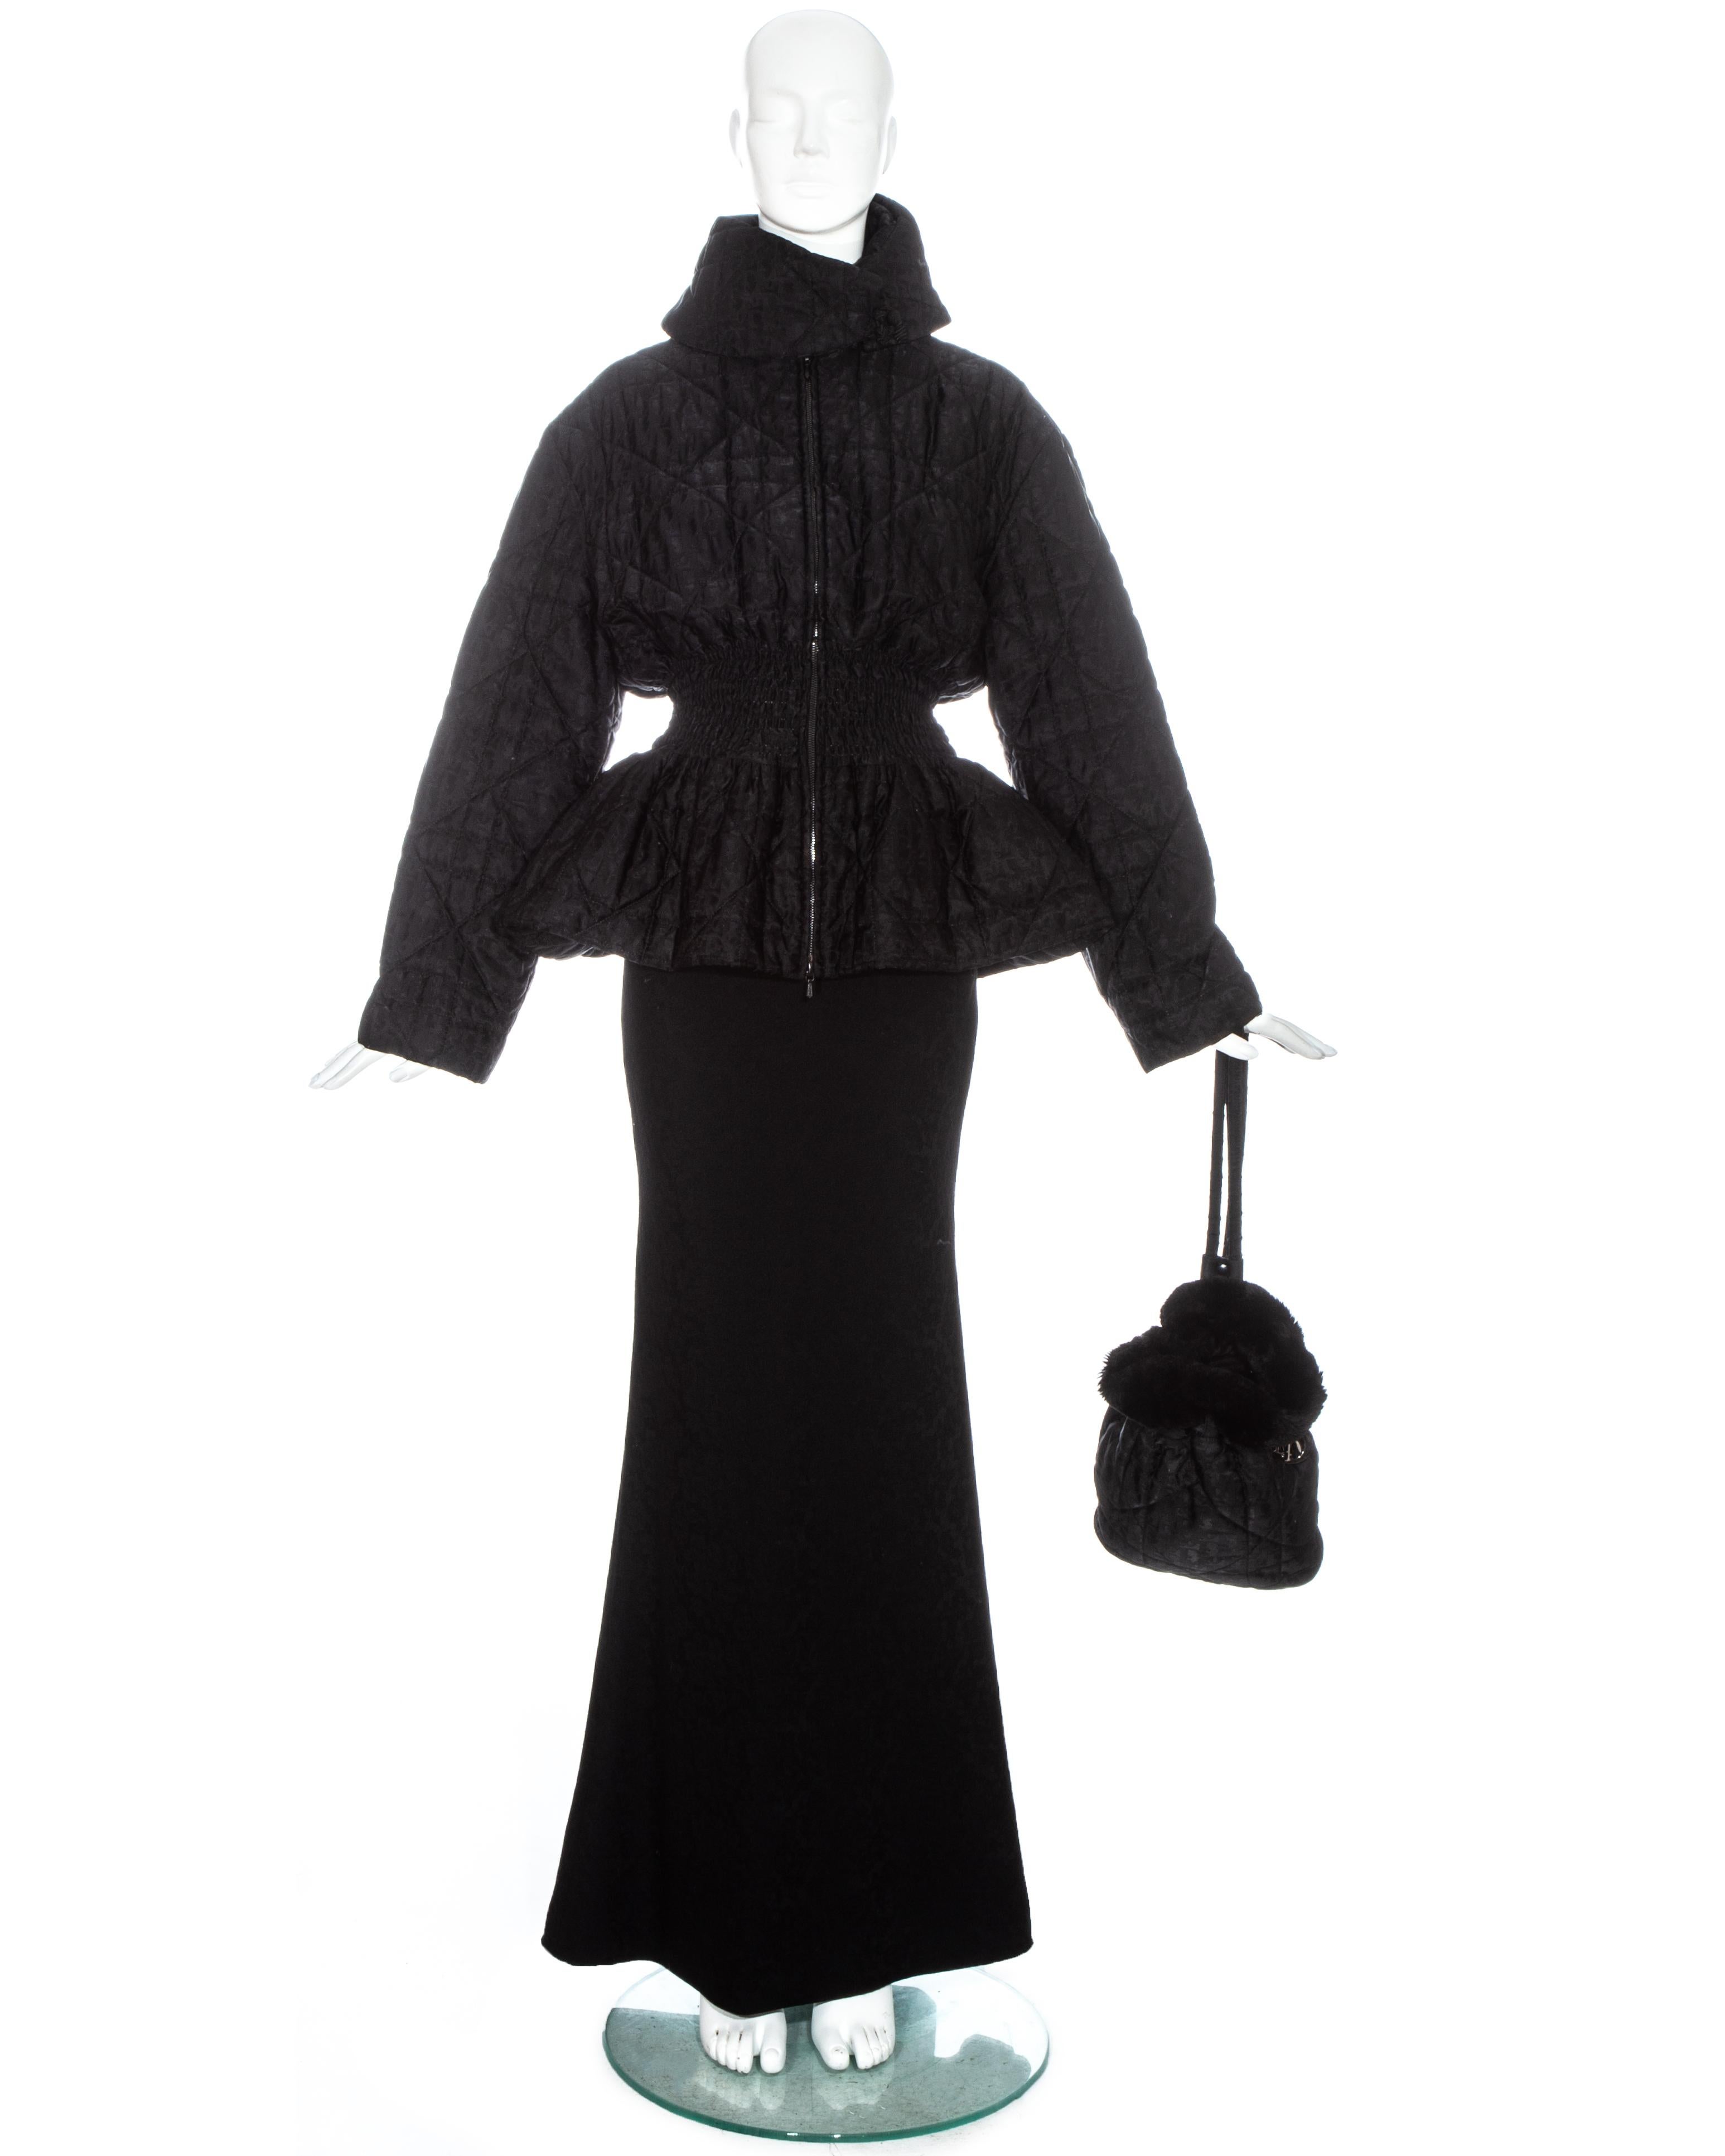 Christian Dior by John Galliano black 3 piece runway ensemble comprising: monogram Cannage quilted nylon jacket with shirred waistband, matching mini backpack with fur trim and wool jacquard fishtail maxi skirt. 

Fall-Winter 1998